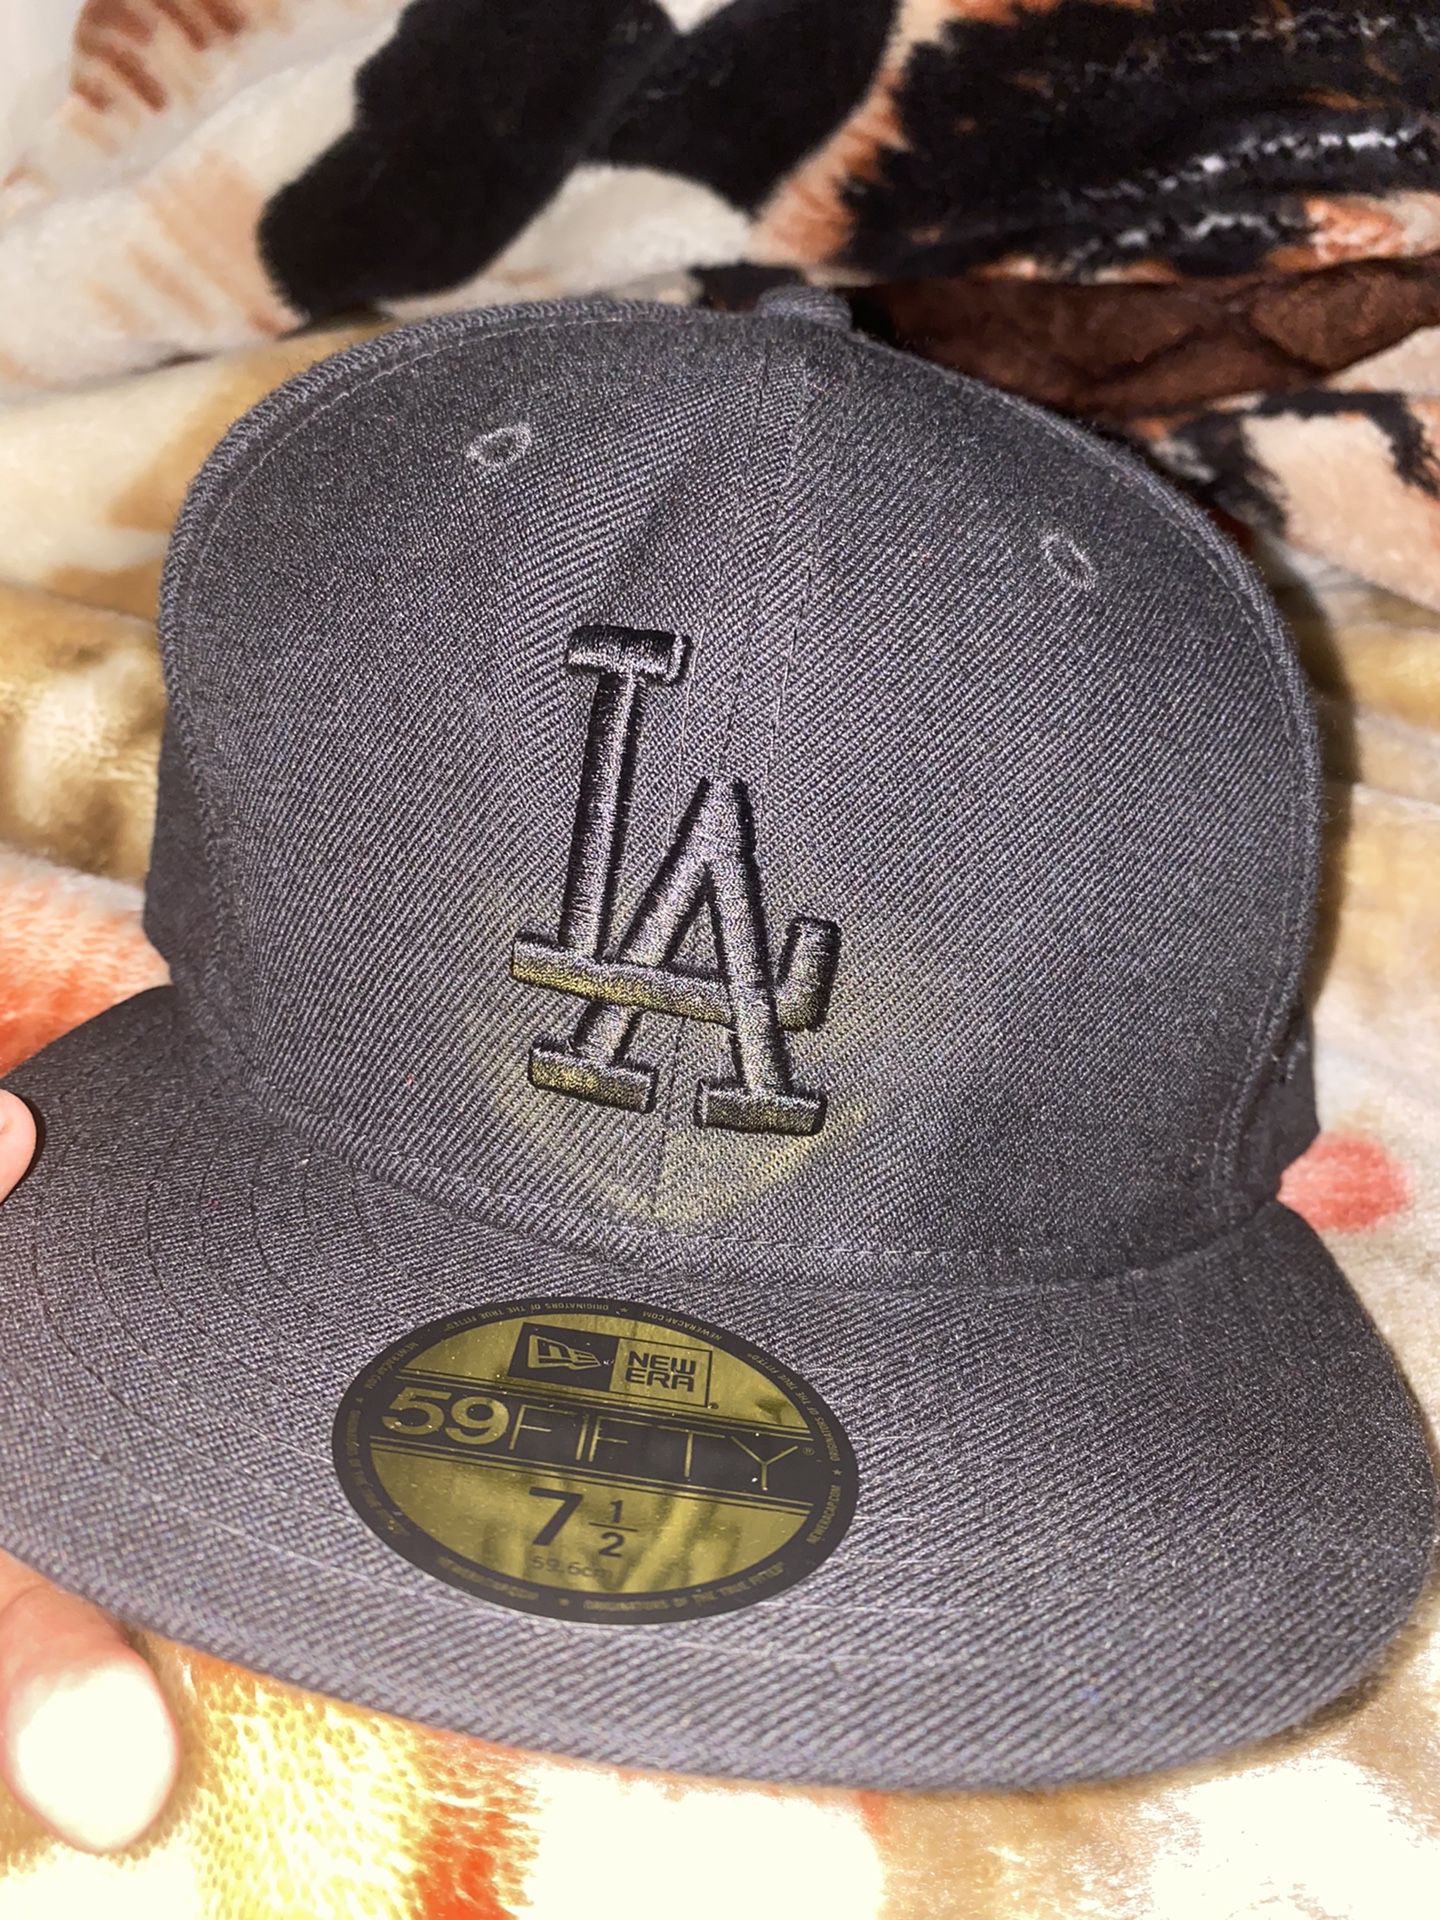 All Black New Era LA Dodgers Fitted Hat 59Fifty 7 1/2